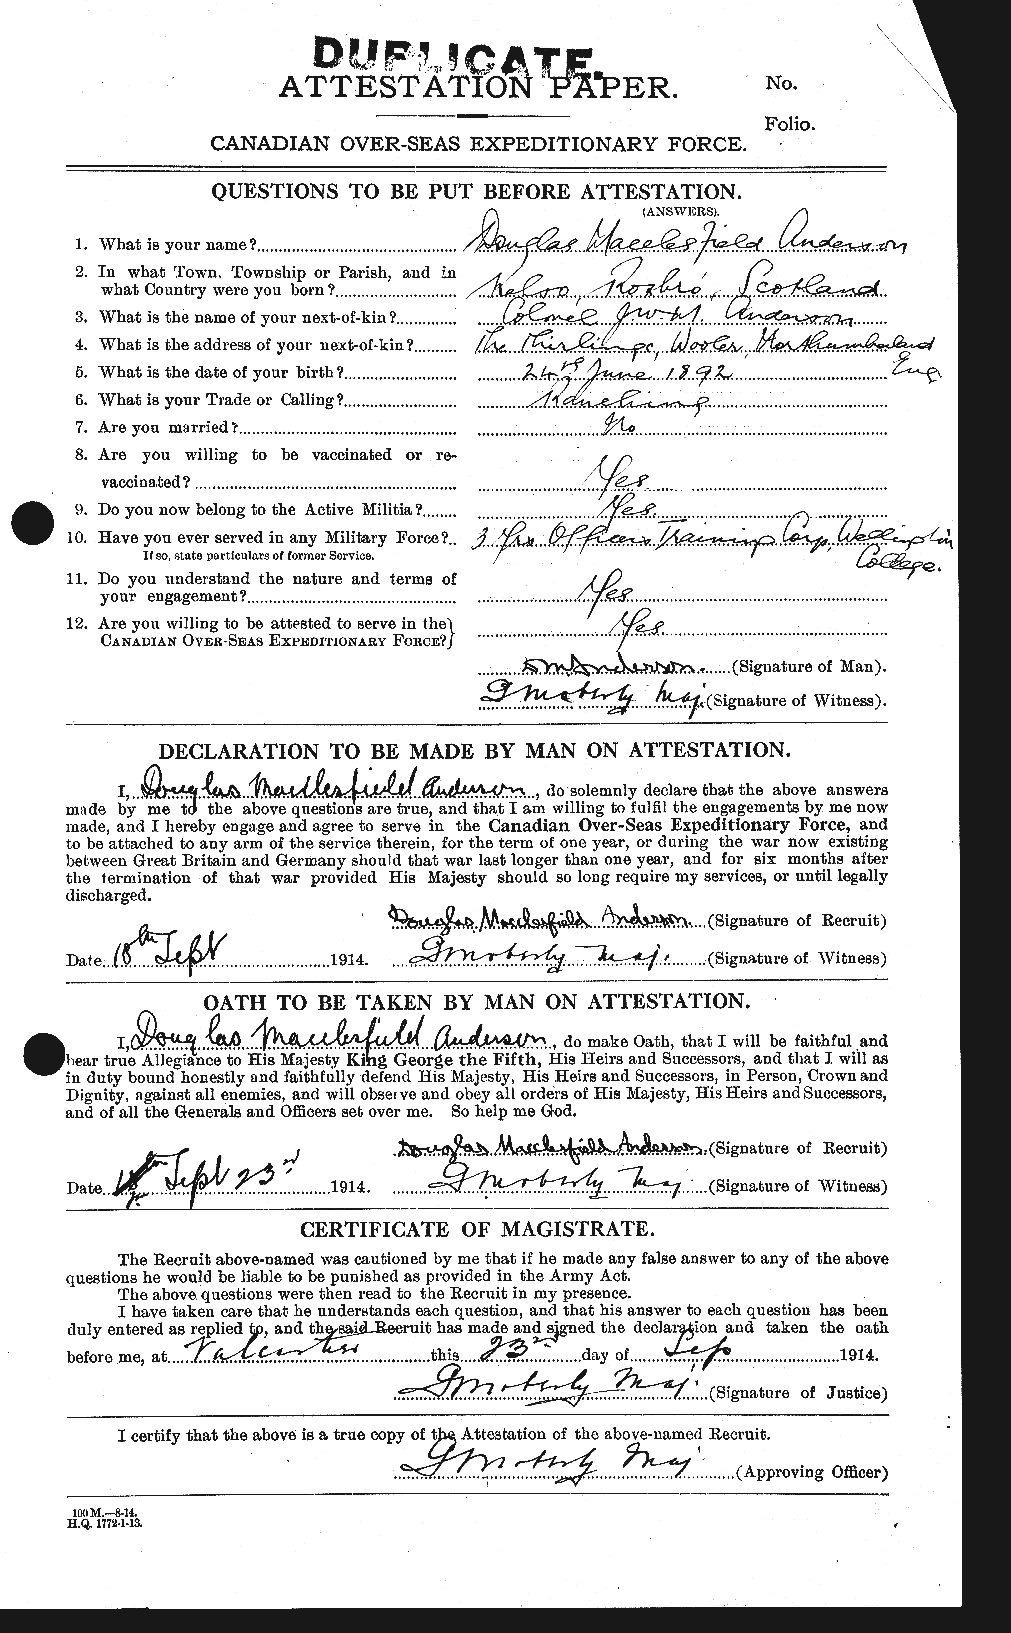 Personnel Records of the First World War - CEF 209975a